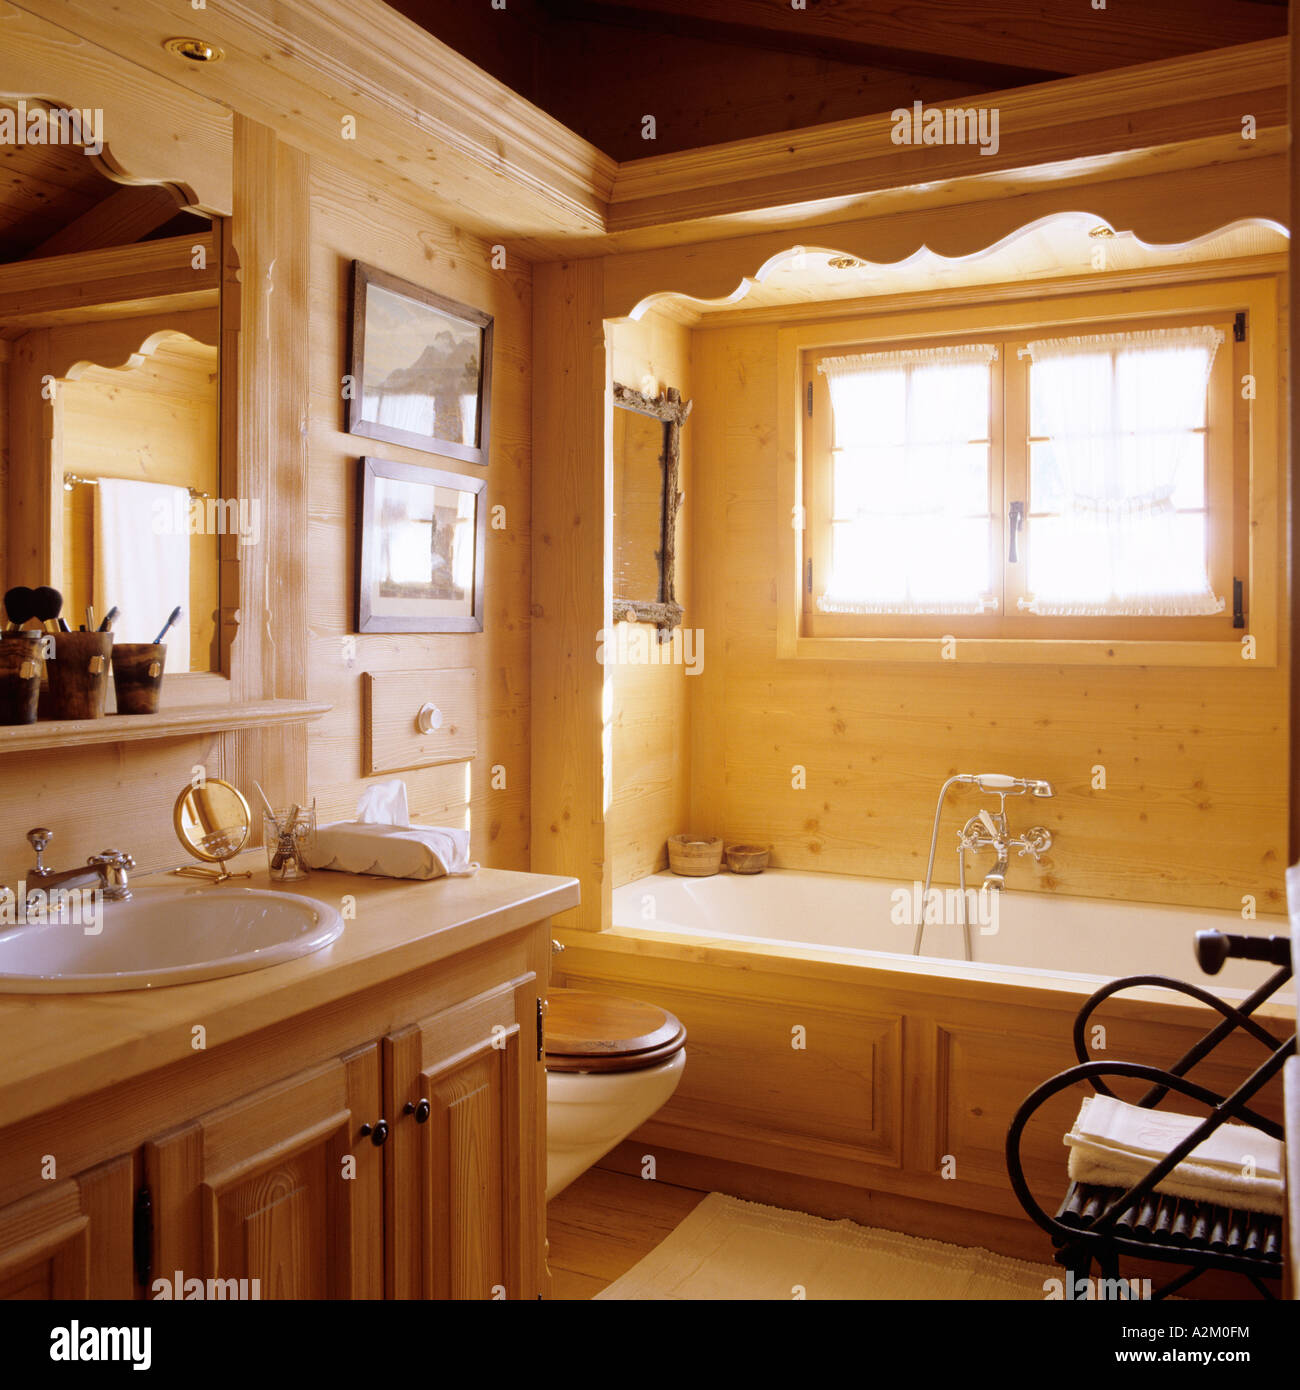 Pine Bathroom In Traditional Mountain Chalet Stock Photo 10549687